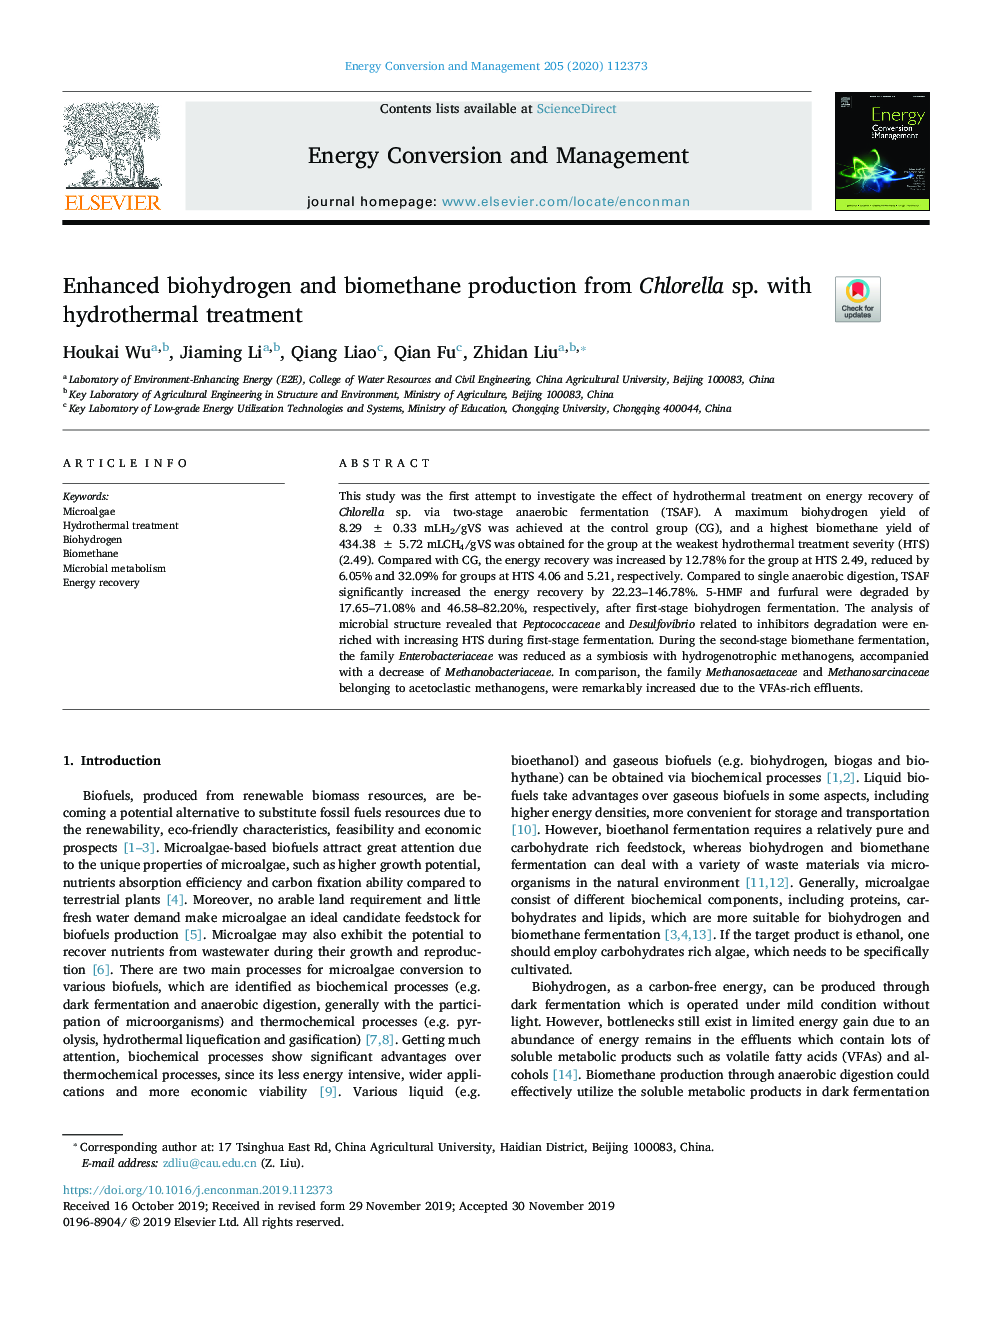 Enhanced biohydrogen and biomethane production from Chlorella sp. with hydrothermal treatment